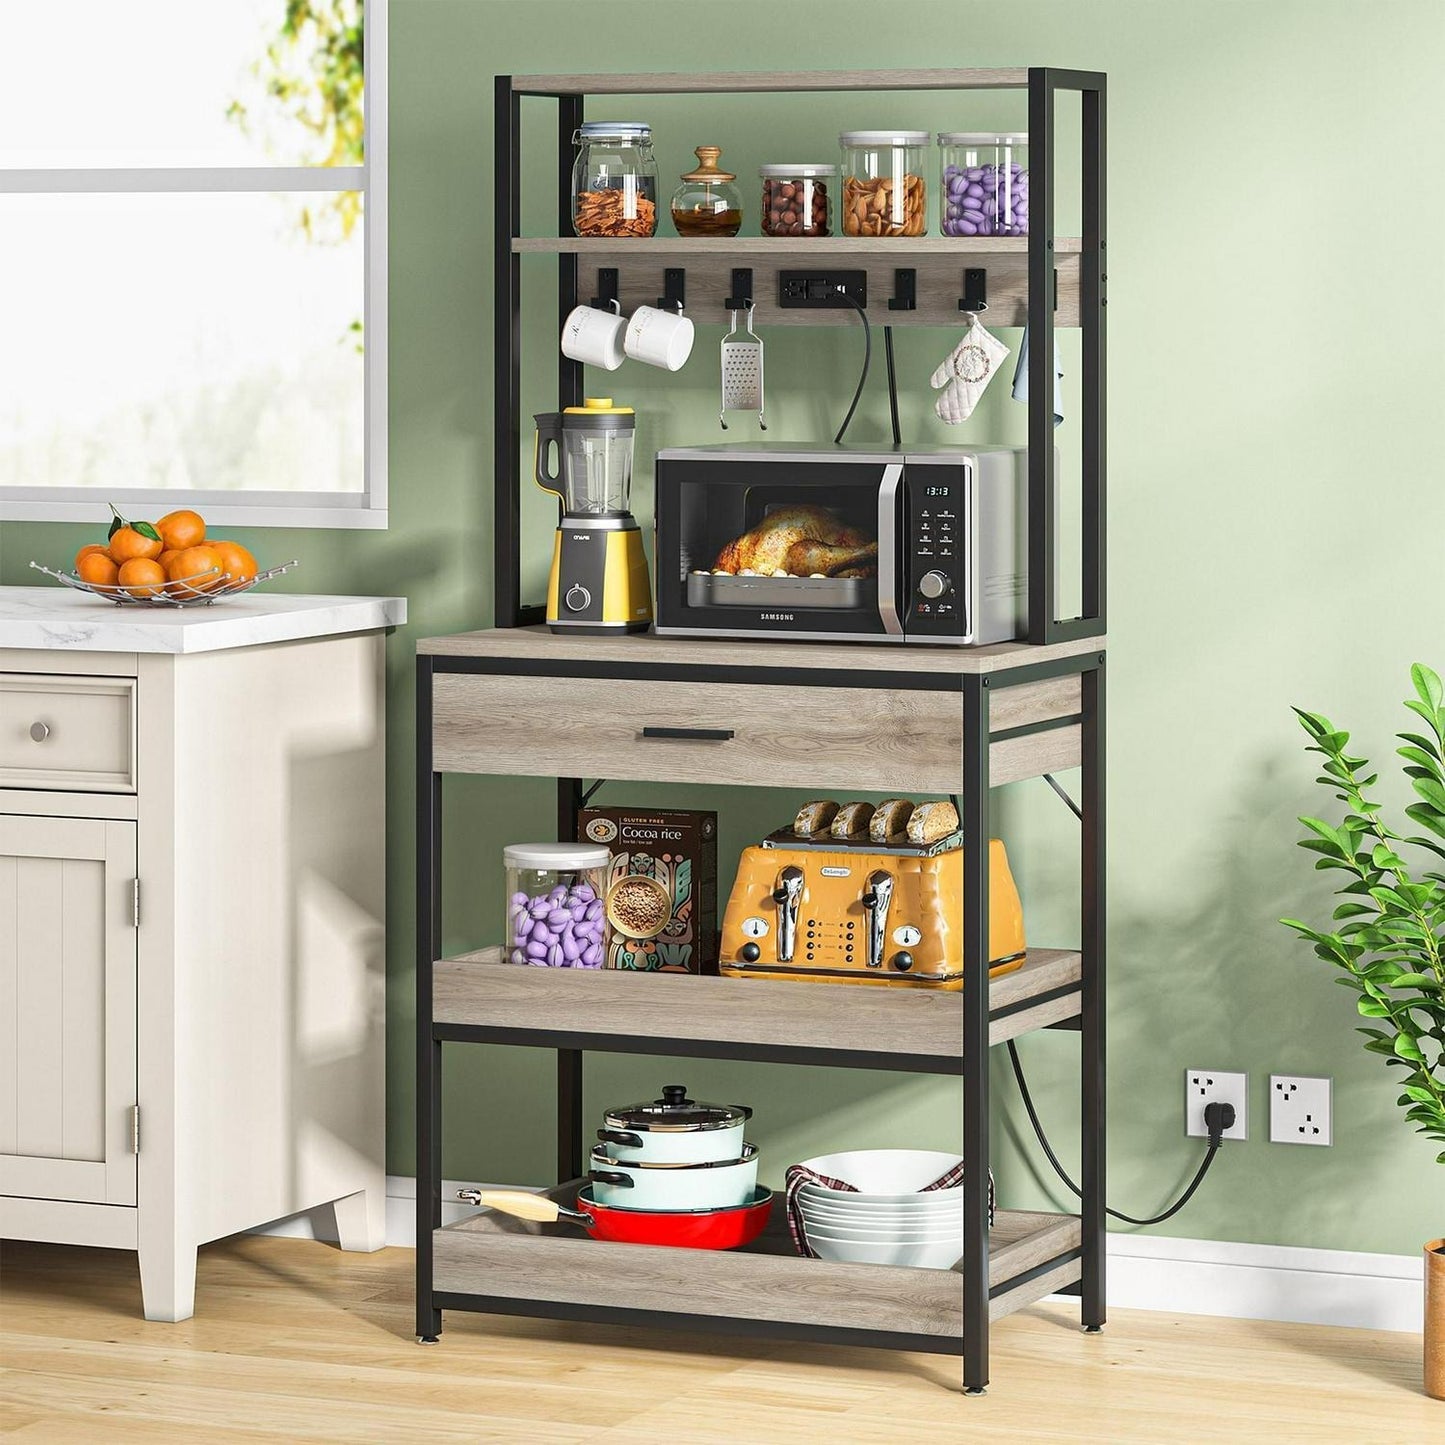 5.5ft 2-Tier Kitchen Baker's Rack w/ Outlets, Rustic Grey Fin - Microwave Stand